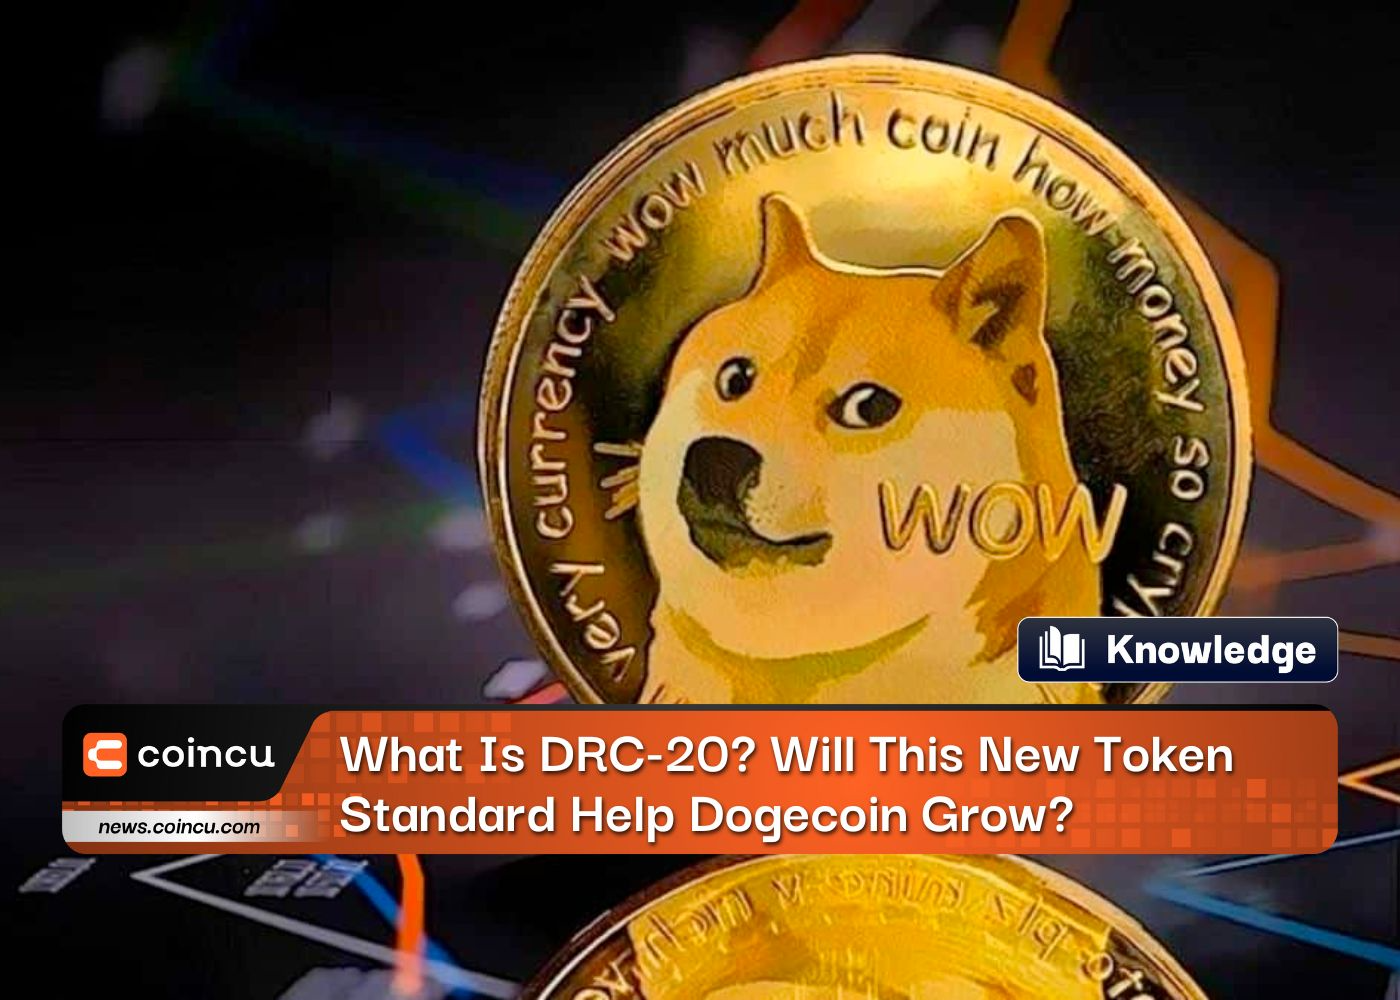 What Is DRC-20? Will This New Token Standard Help Dogecoin Grow?